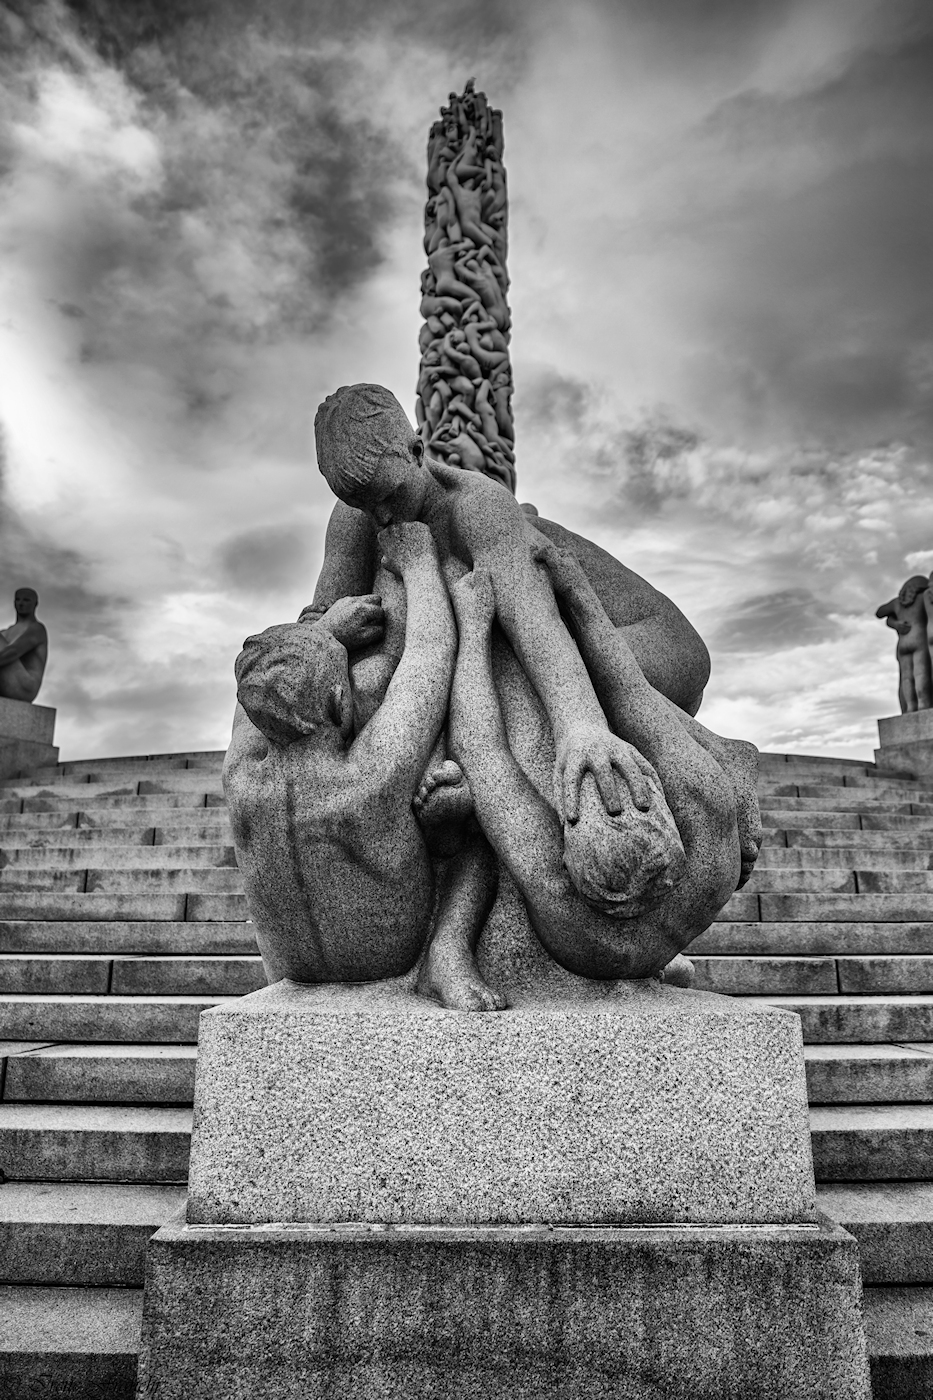 Vigeland Park - the monolith and its sculptures...